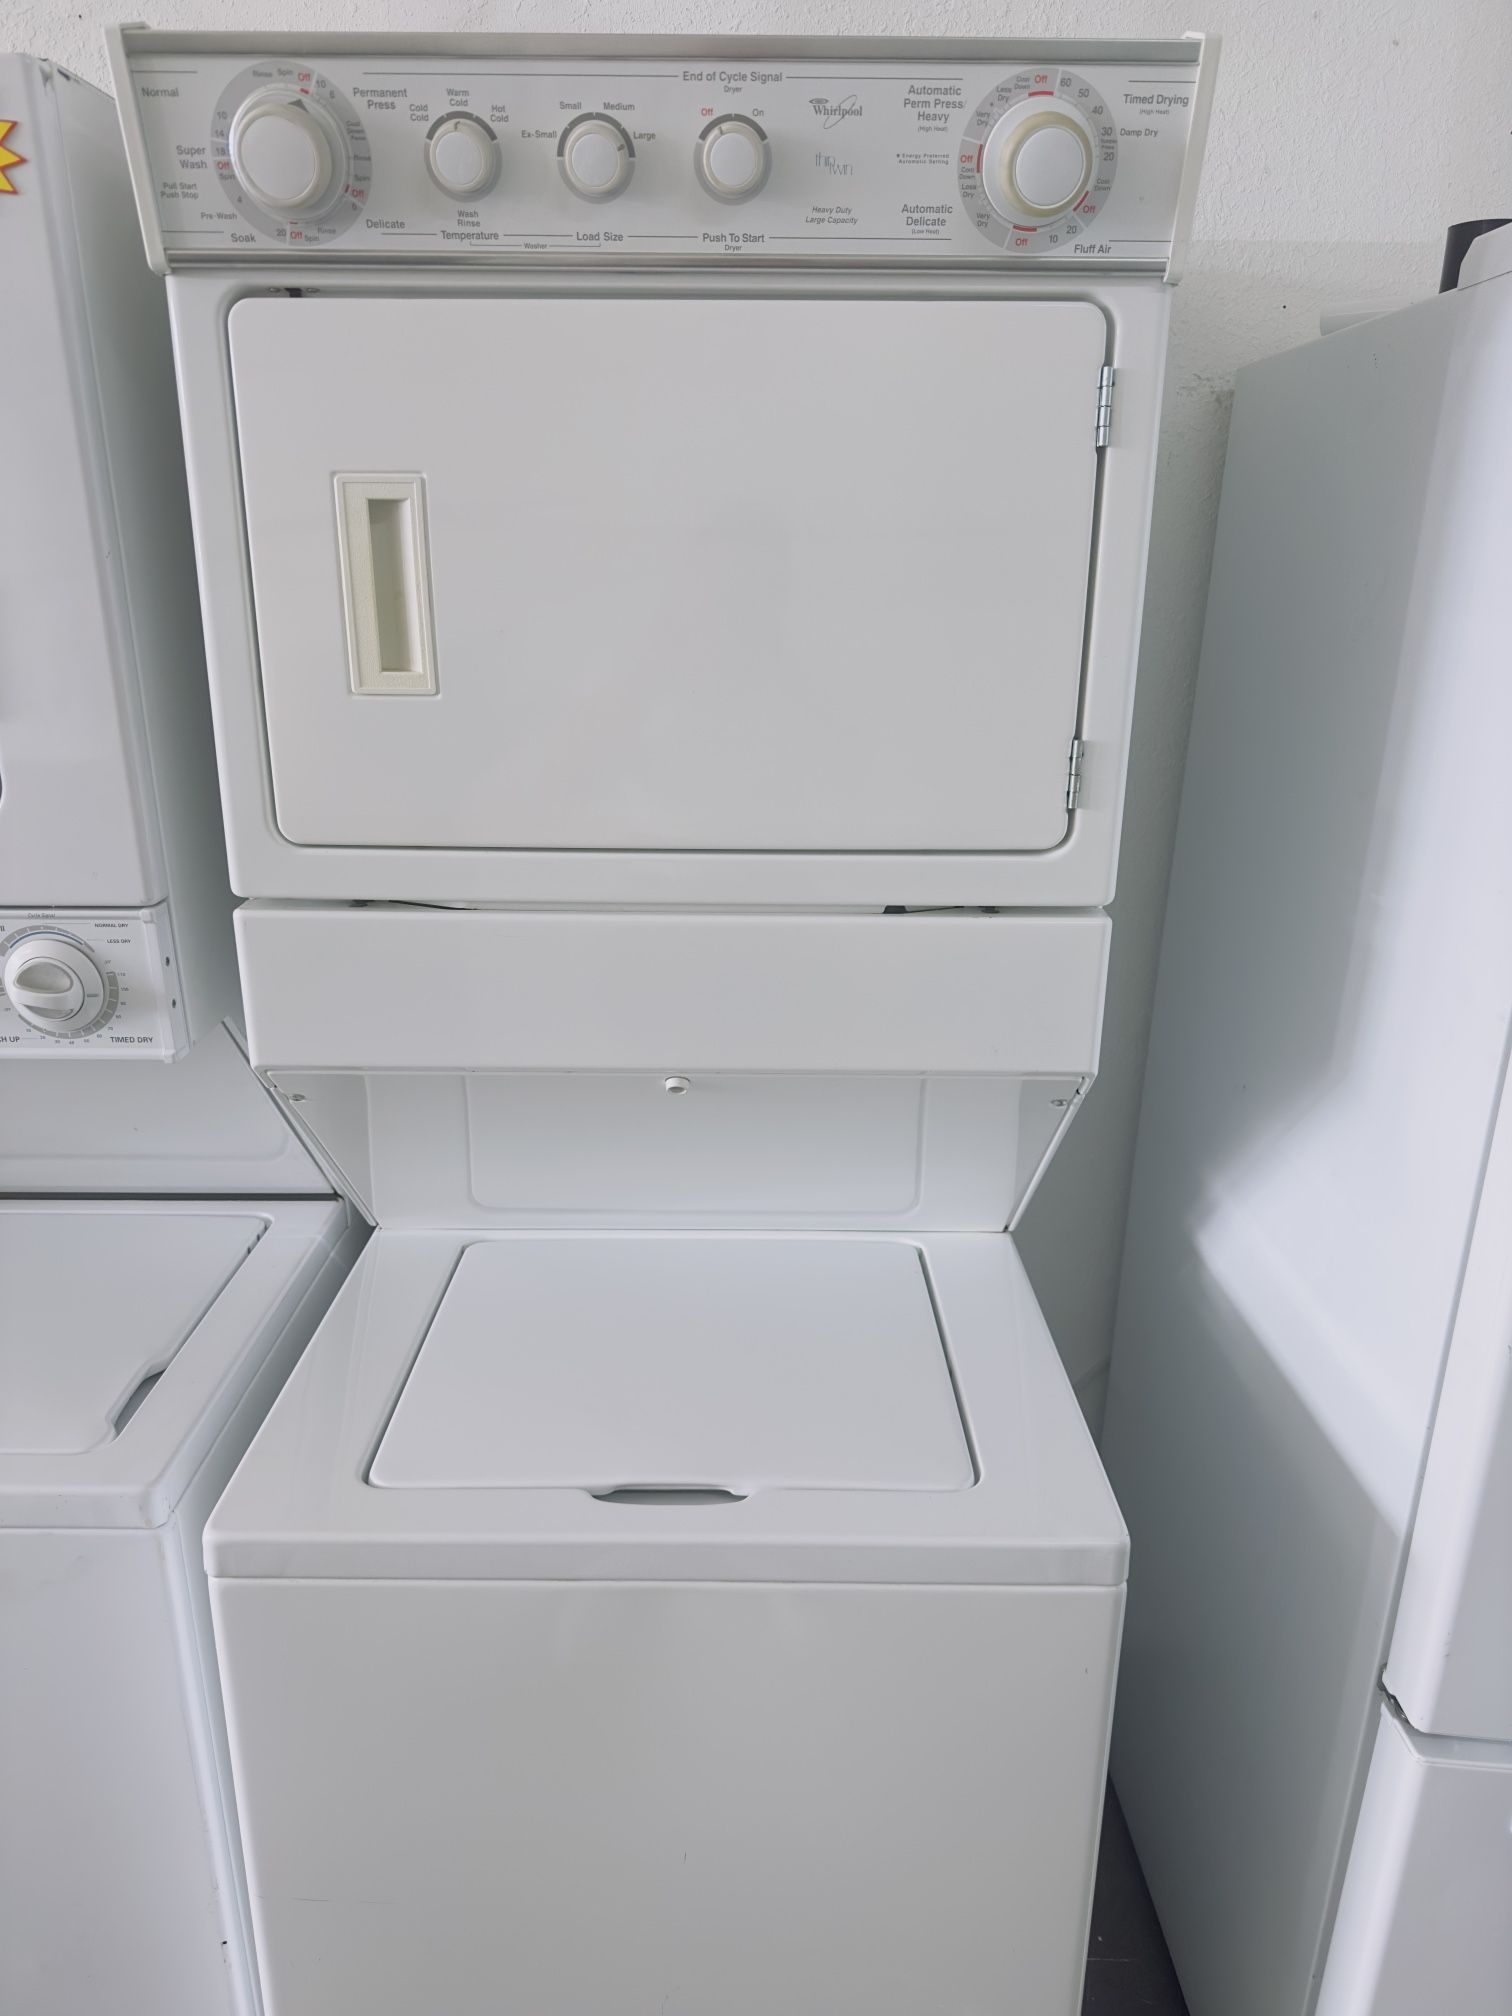 Stackable Washer And Dreyer Whirlpool 